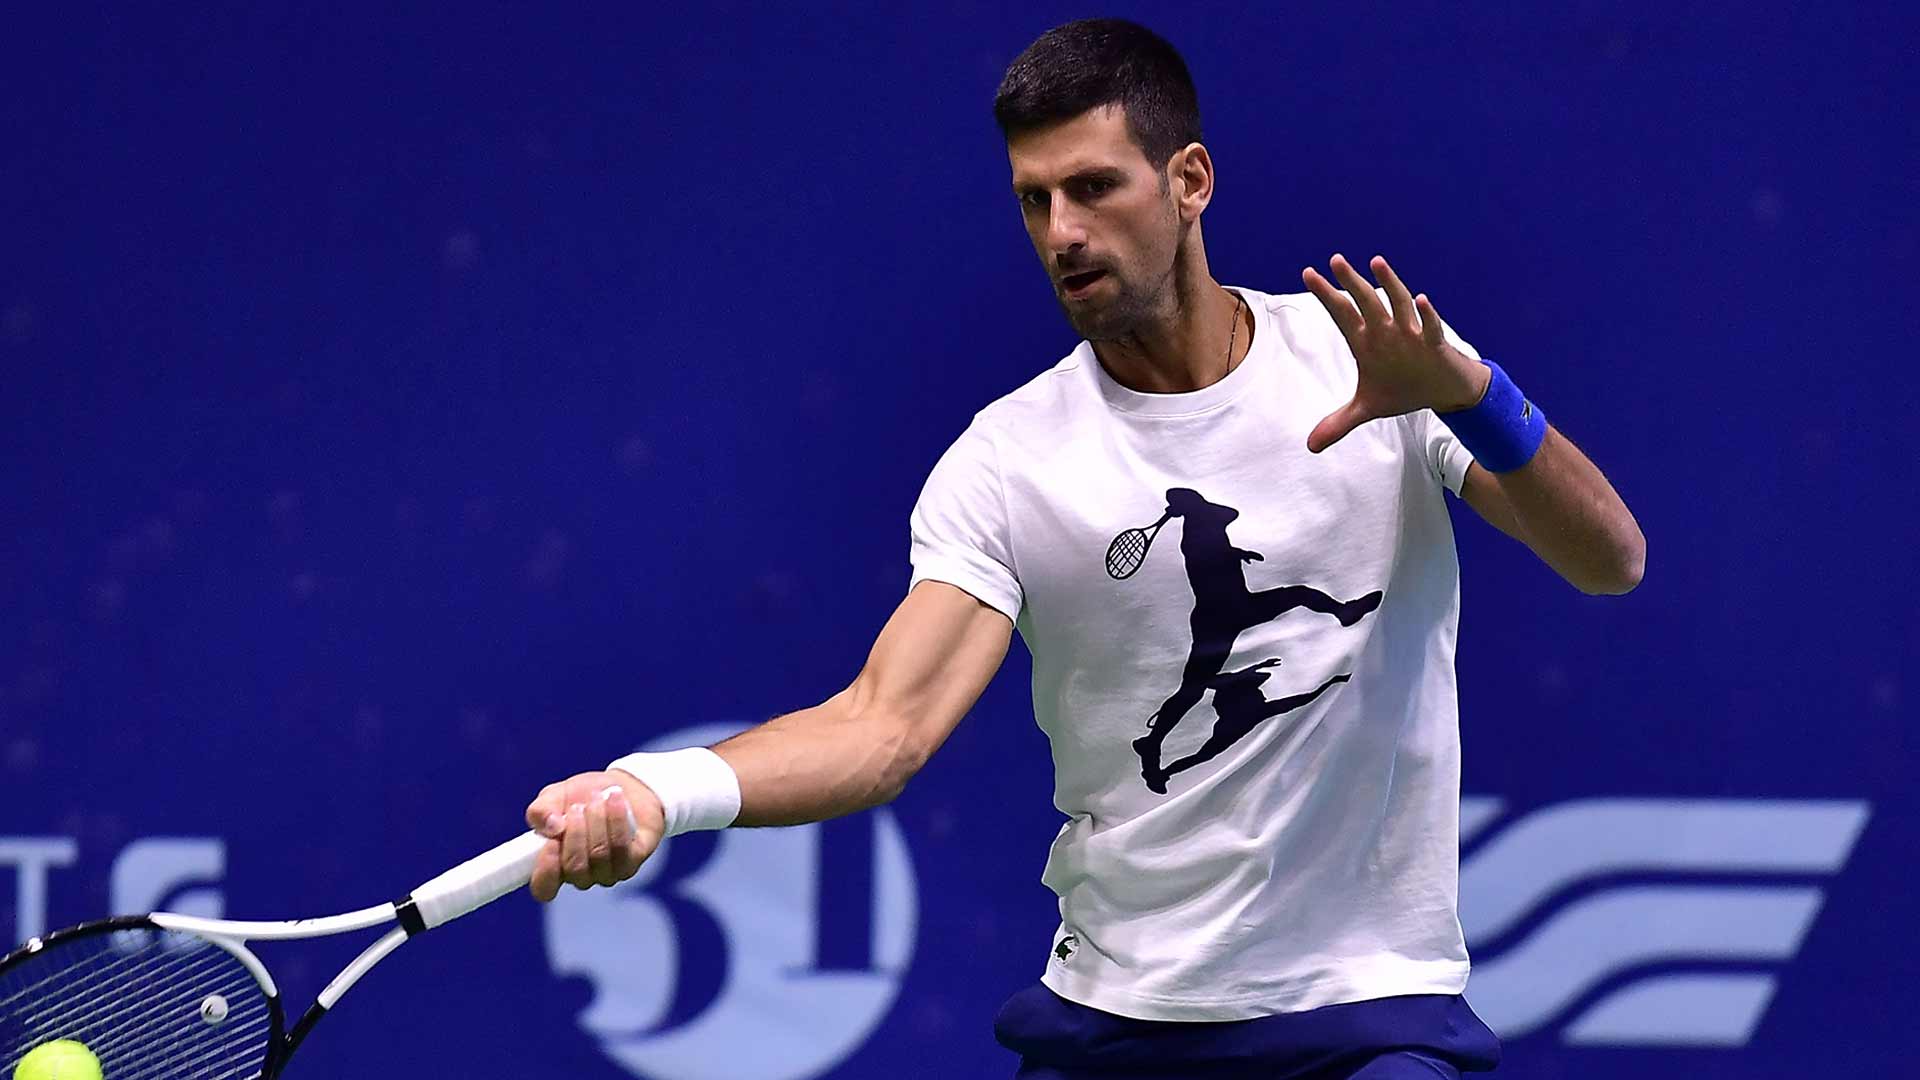 Novak Djokovic practises in Astana on Tuesday in preparation for his first-round match against Cristian Garin.